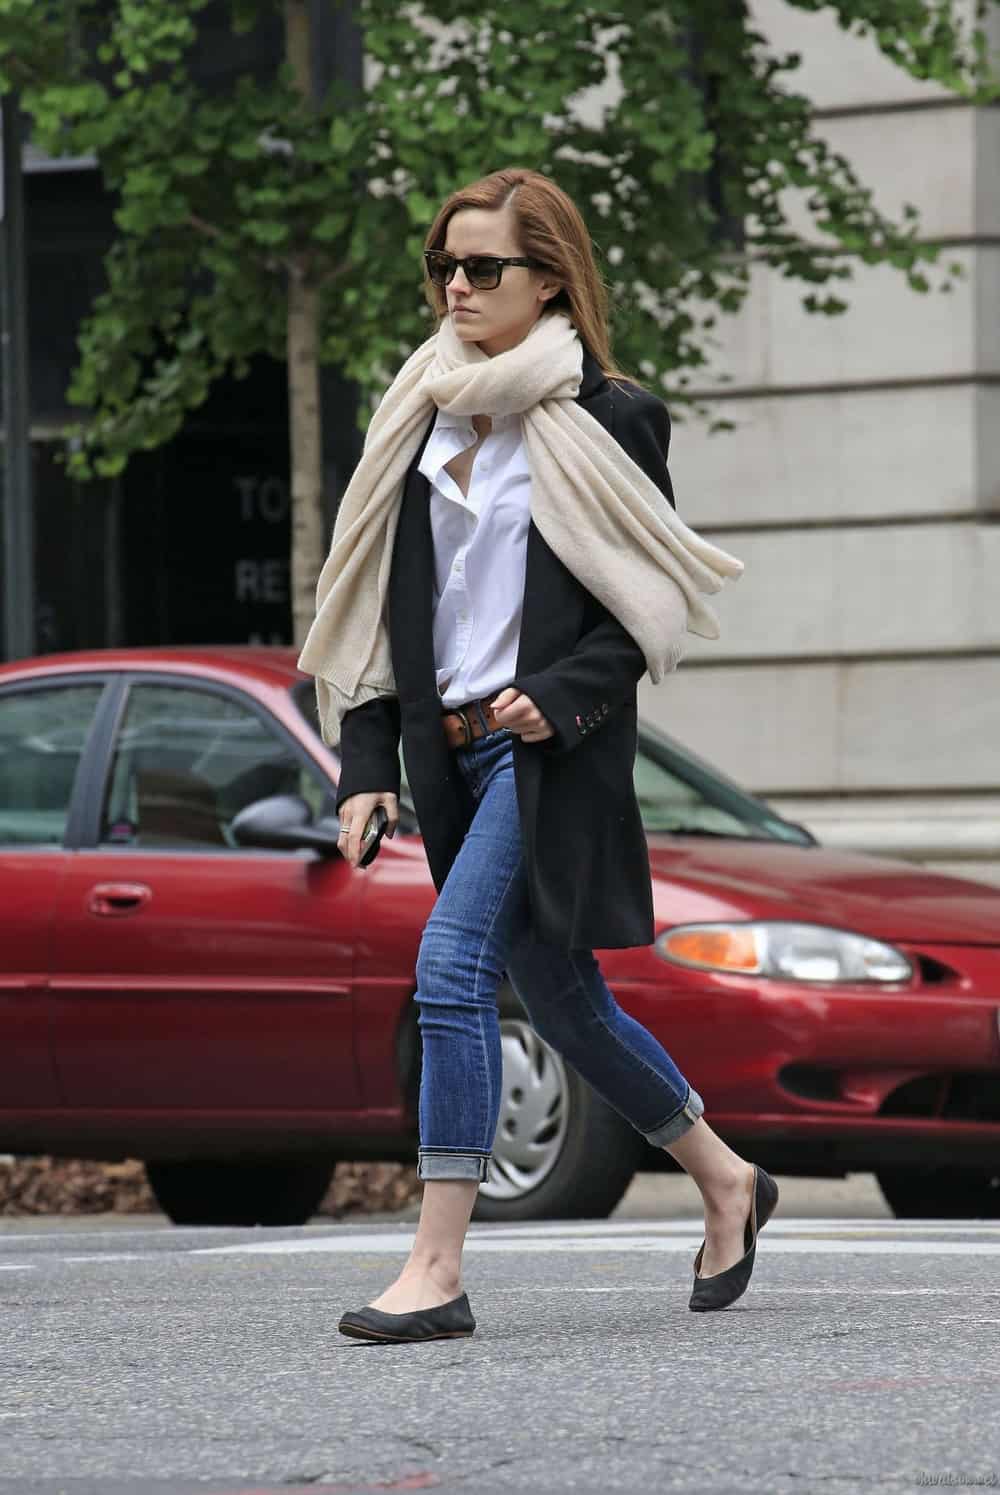 Emma Watson Looked Stylish in Streetwear while Out and About in Manhattan